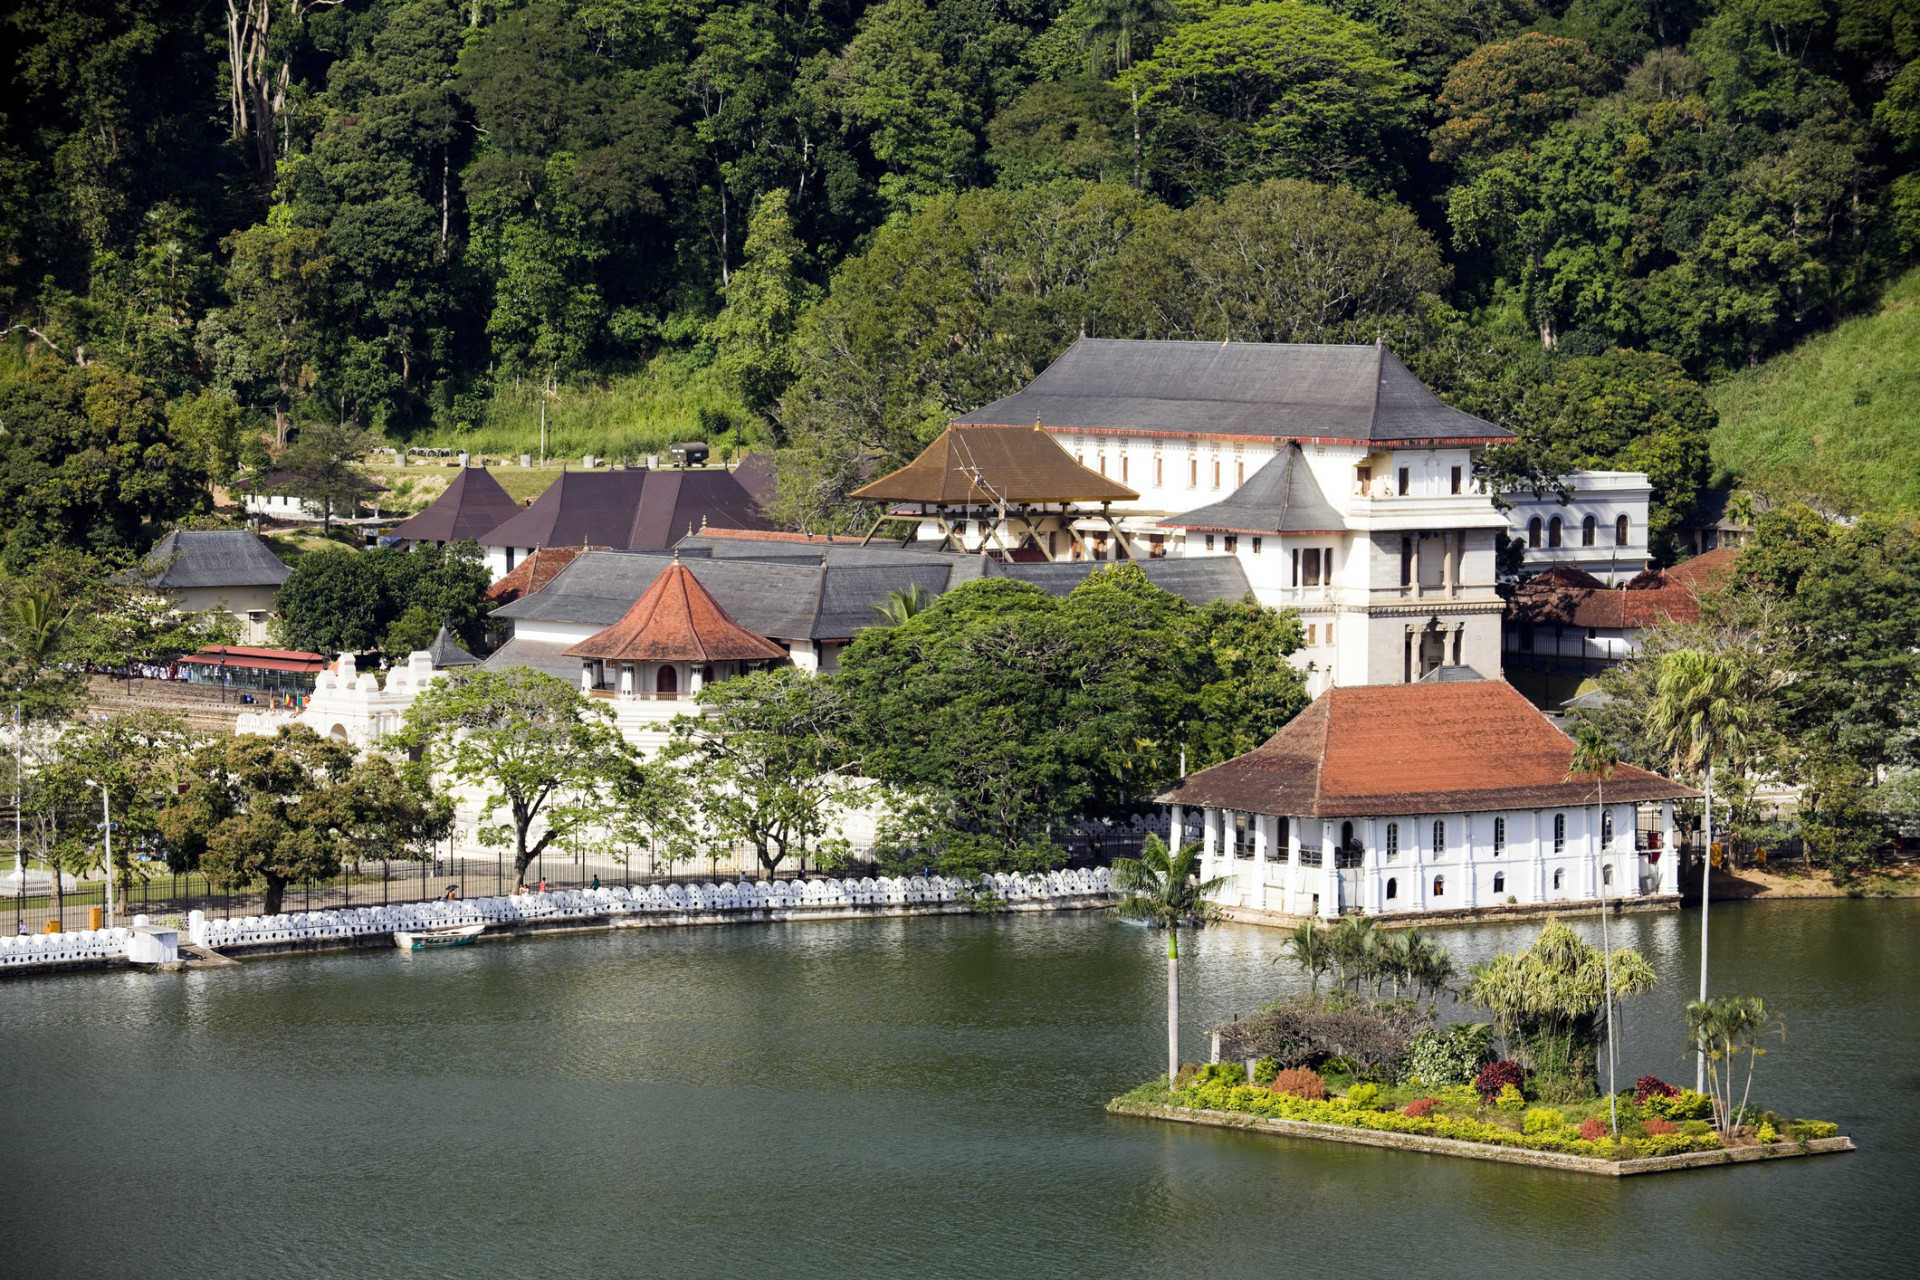 Located in Kandy's royal temple complex is the Temple of the Tooth, which houses the relic of the tooth of the Buddha. The temple is a UNESCO World Heritage Site.<p>You may also like:<a href="https://www.starsinsider.com/n/439582?utm_source=msn.com&utm_medium=display&utm_campaign=referral_description&utm_content=273472v10en-us"> The best advice from celebrity makeup artists</a></p>